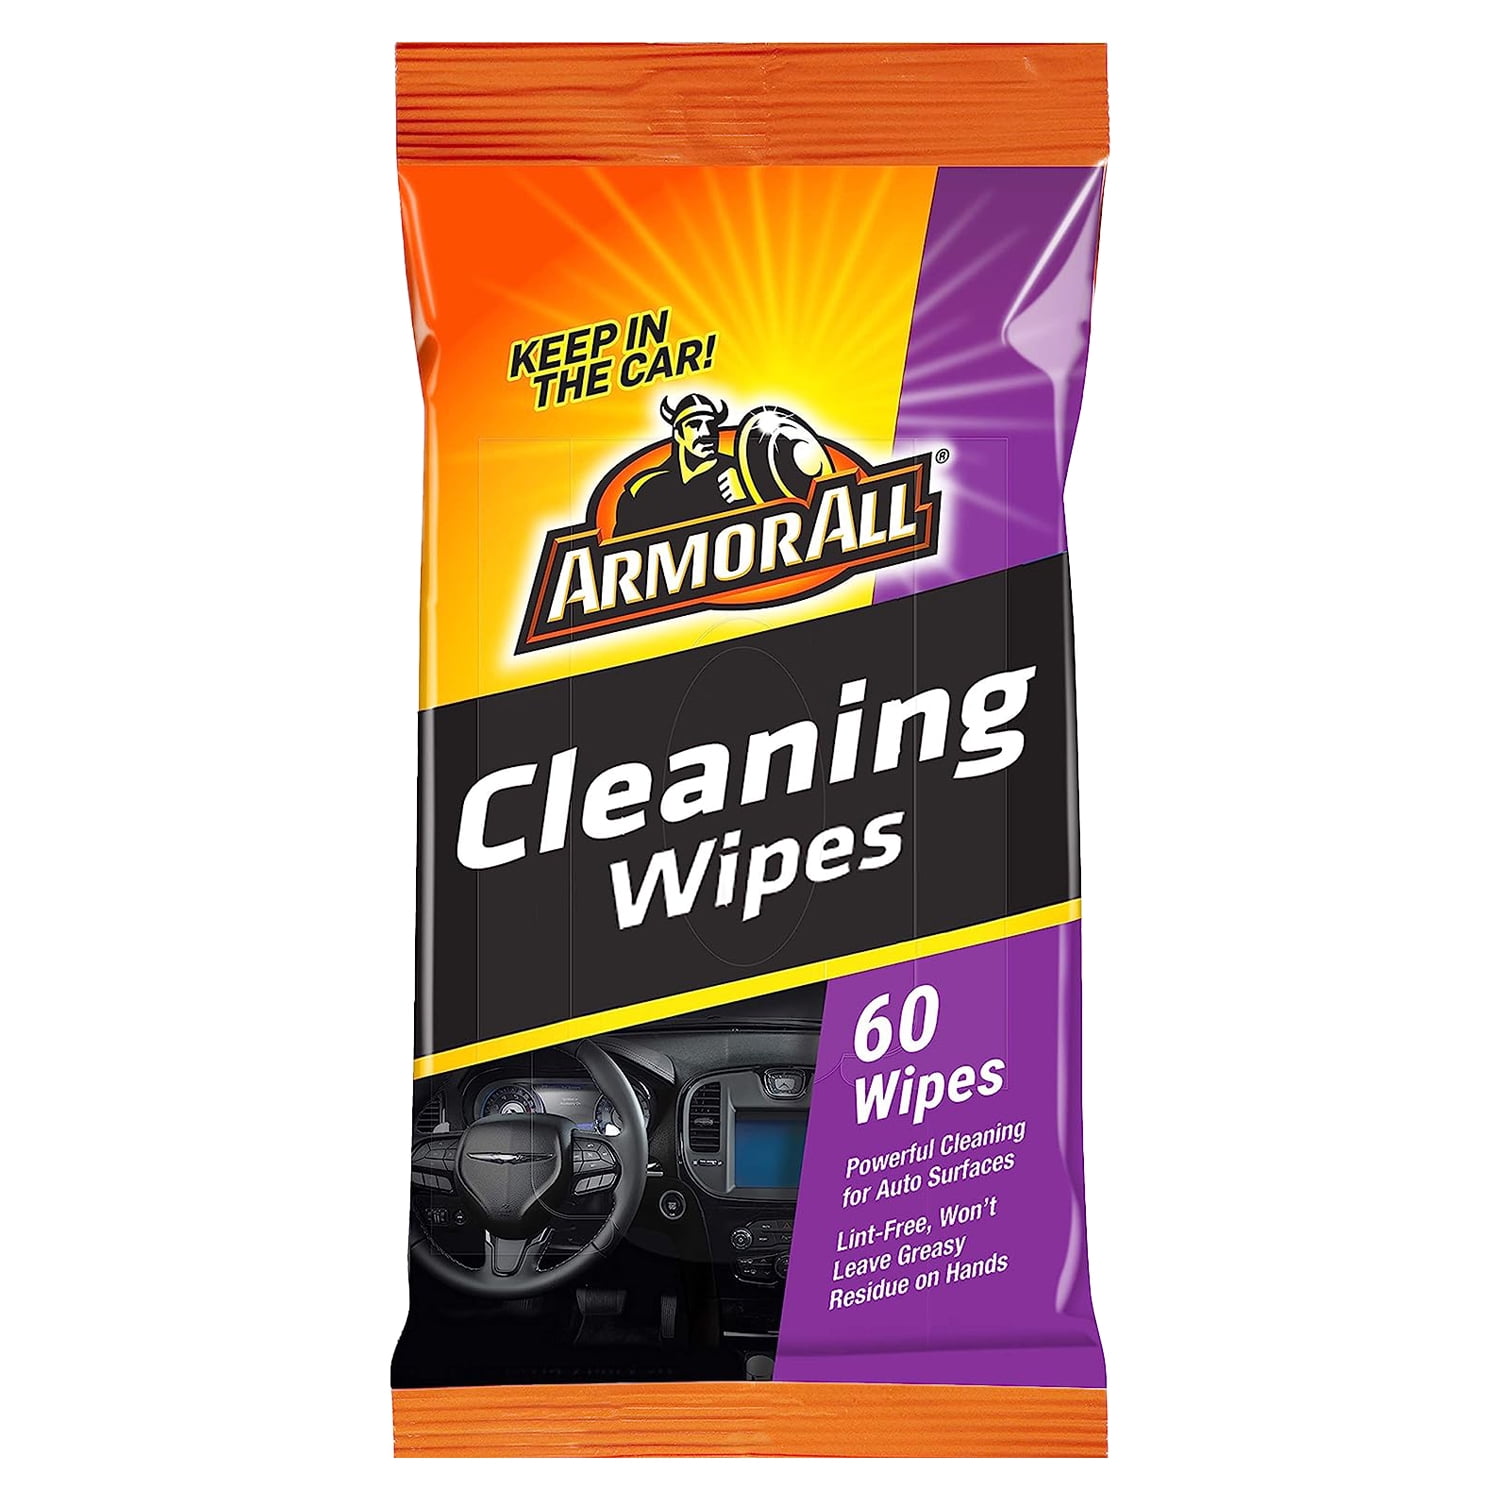 Armor All Car Detailer Wipes by Armor All, Interior Car Wipes for Dirt and  Dust, 25 Count